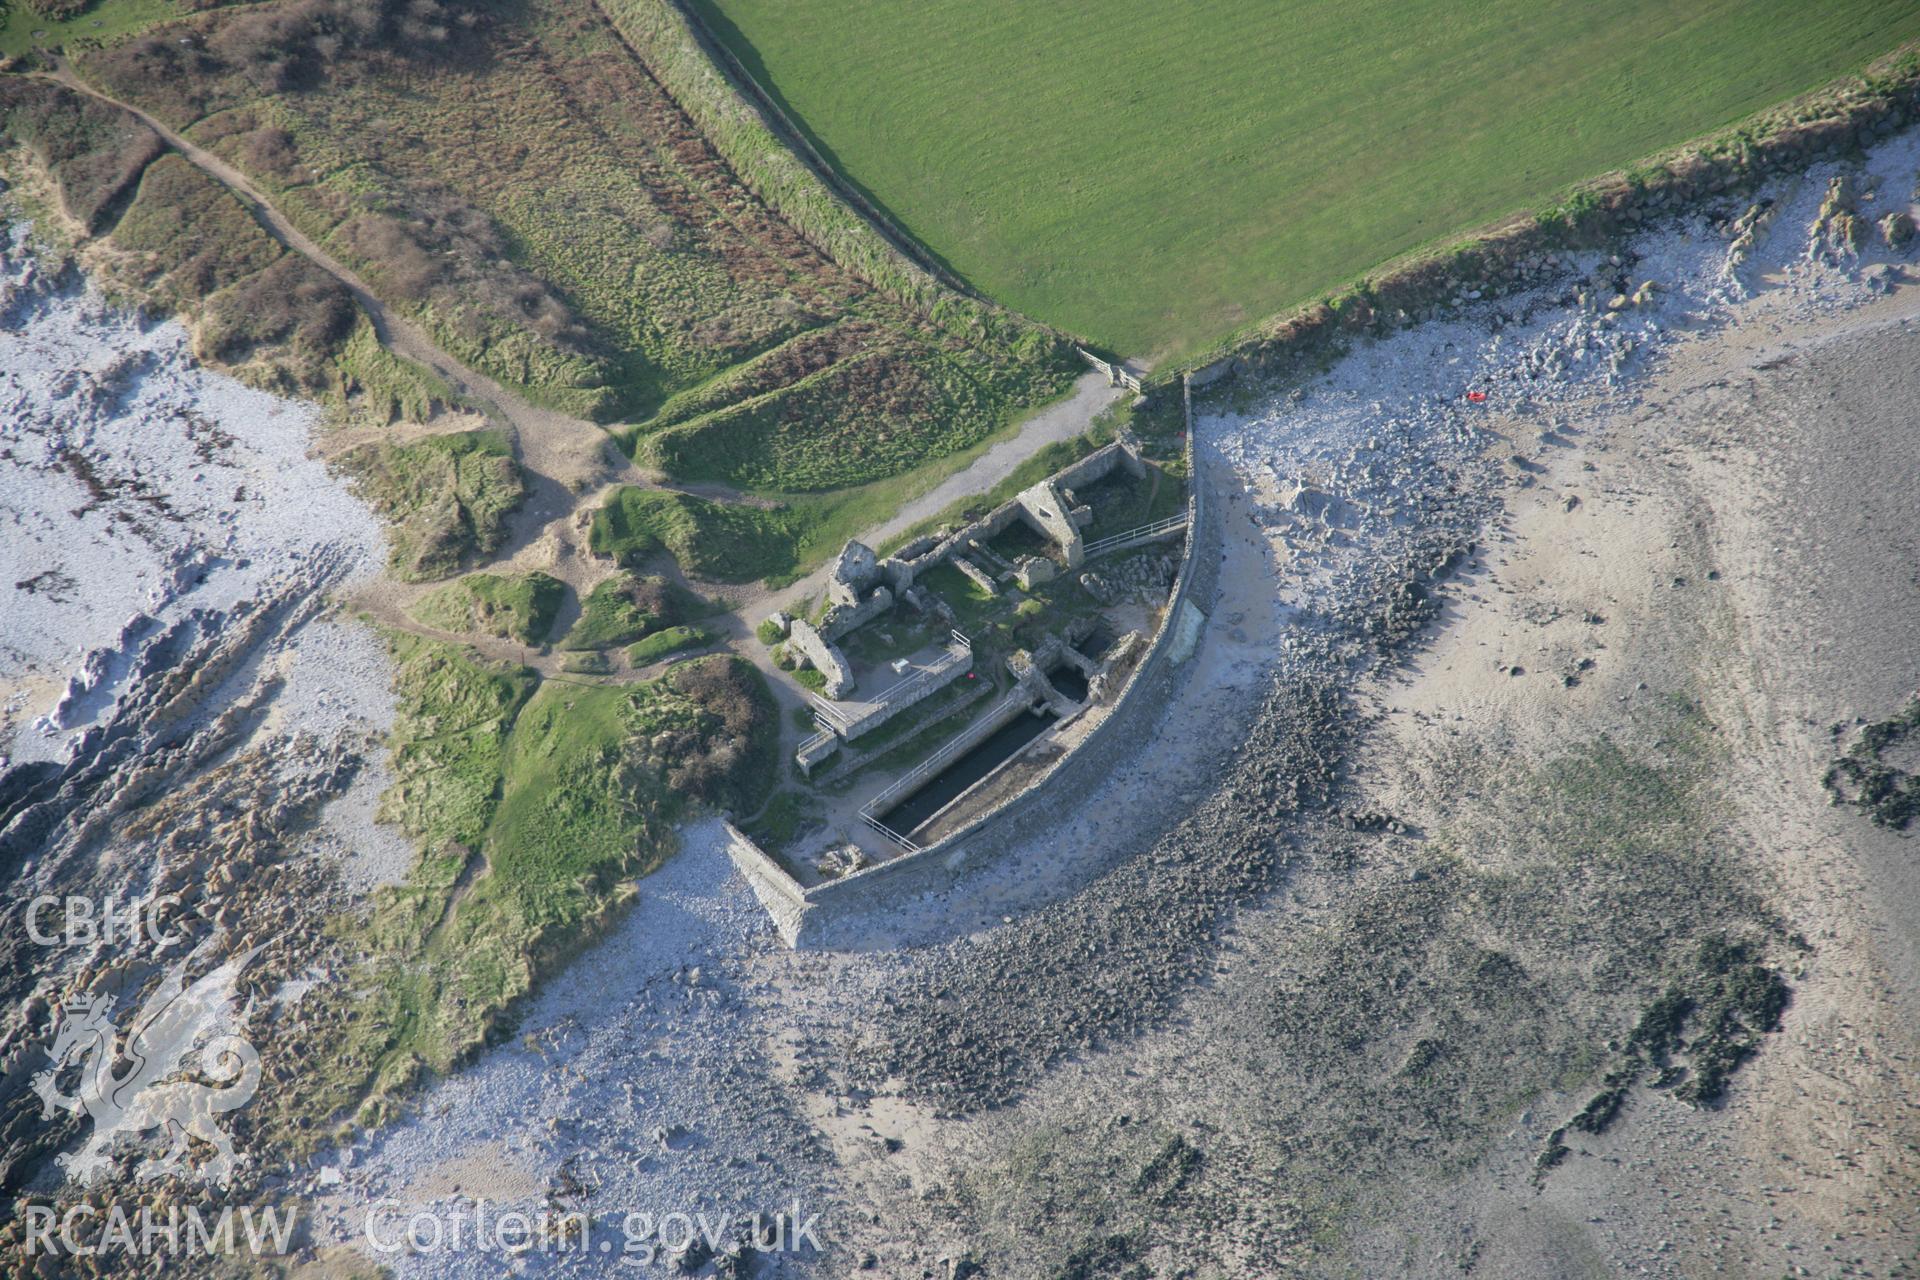 RCAHMW colour oblique aerial photograph of Port Eynon Salt House from the east. Taken on 26 January 2006 by Toby Driver.